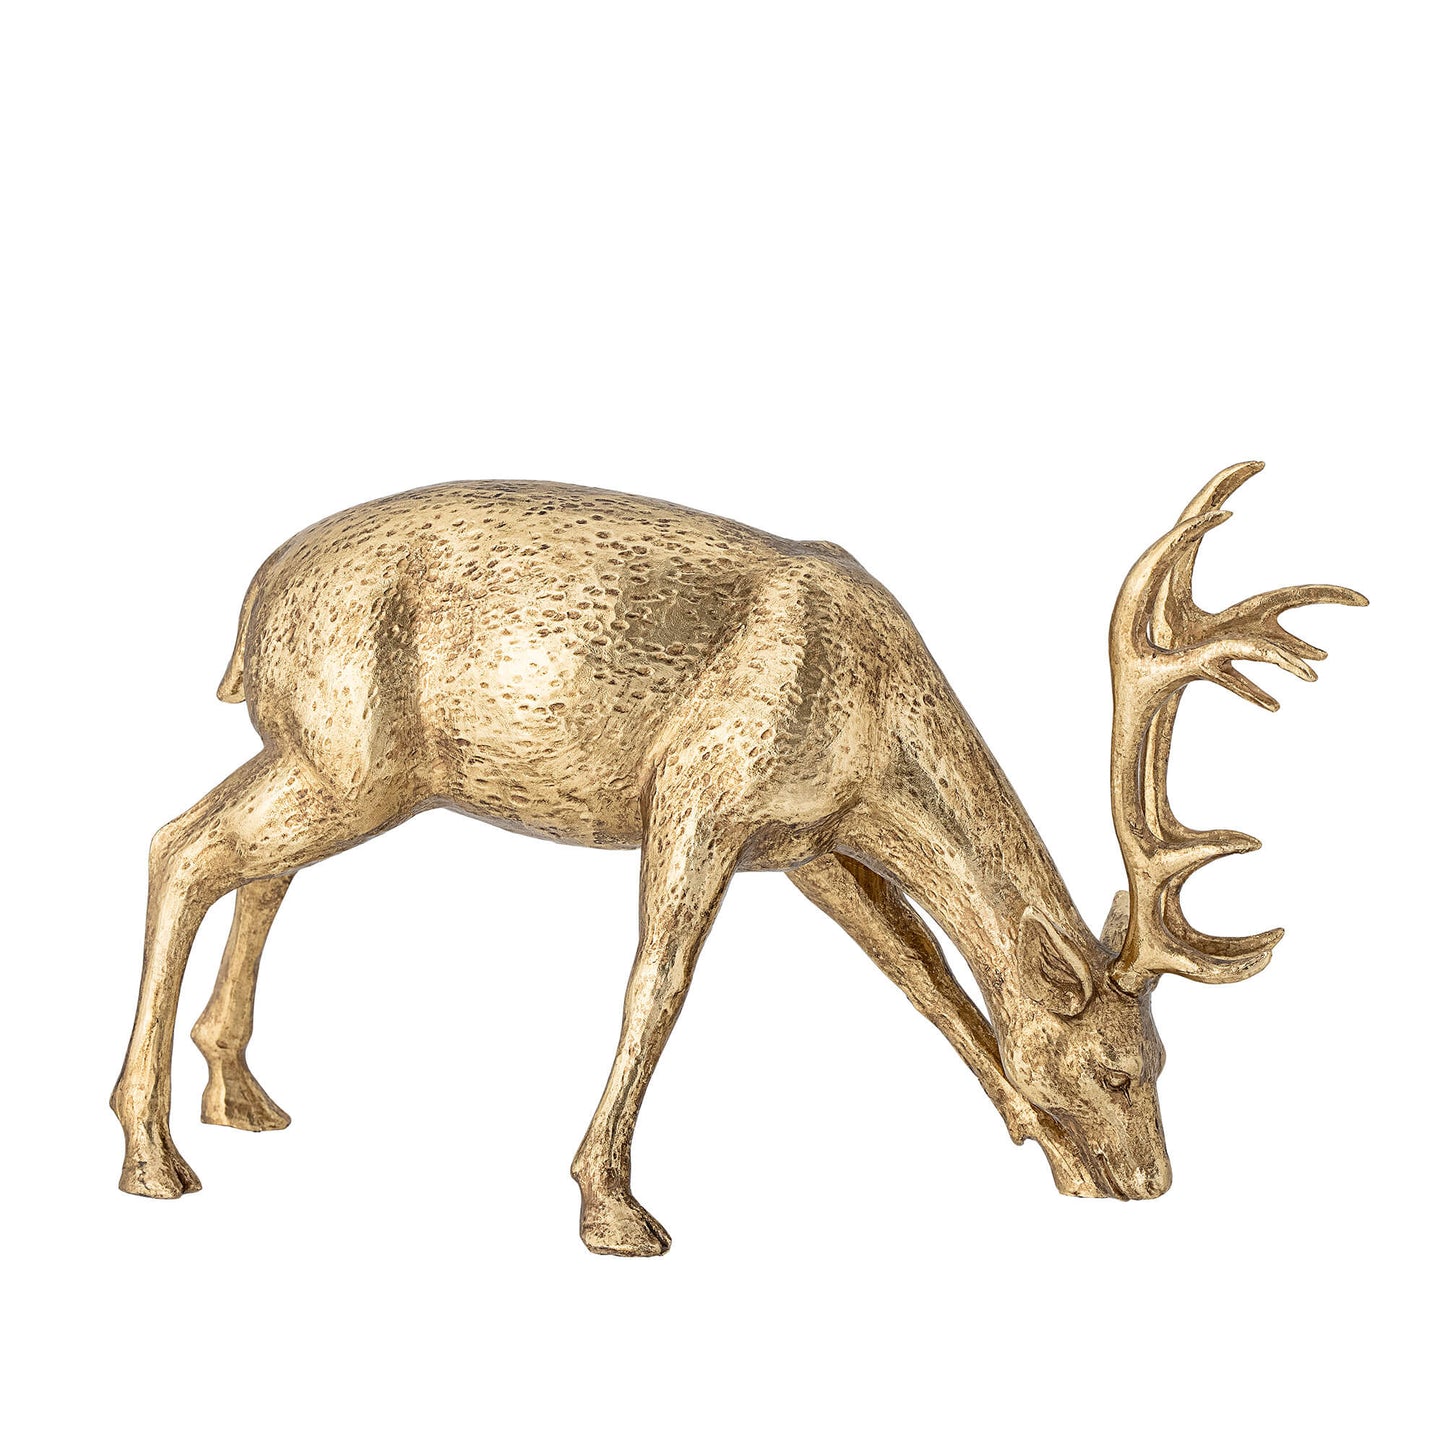 Keera Deer by Bloomingville - A decorative deer made of polyresin in a beautiful gold look. Perfect for styling on the Christmas table or any festive setting. Dimensions: 19cm in height, 33cm in length, and 13cm in width